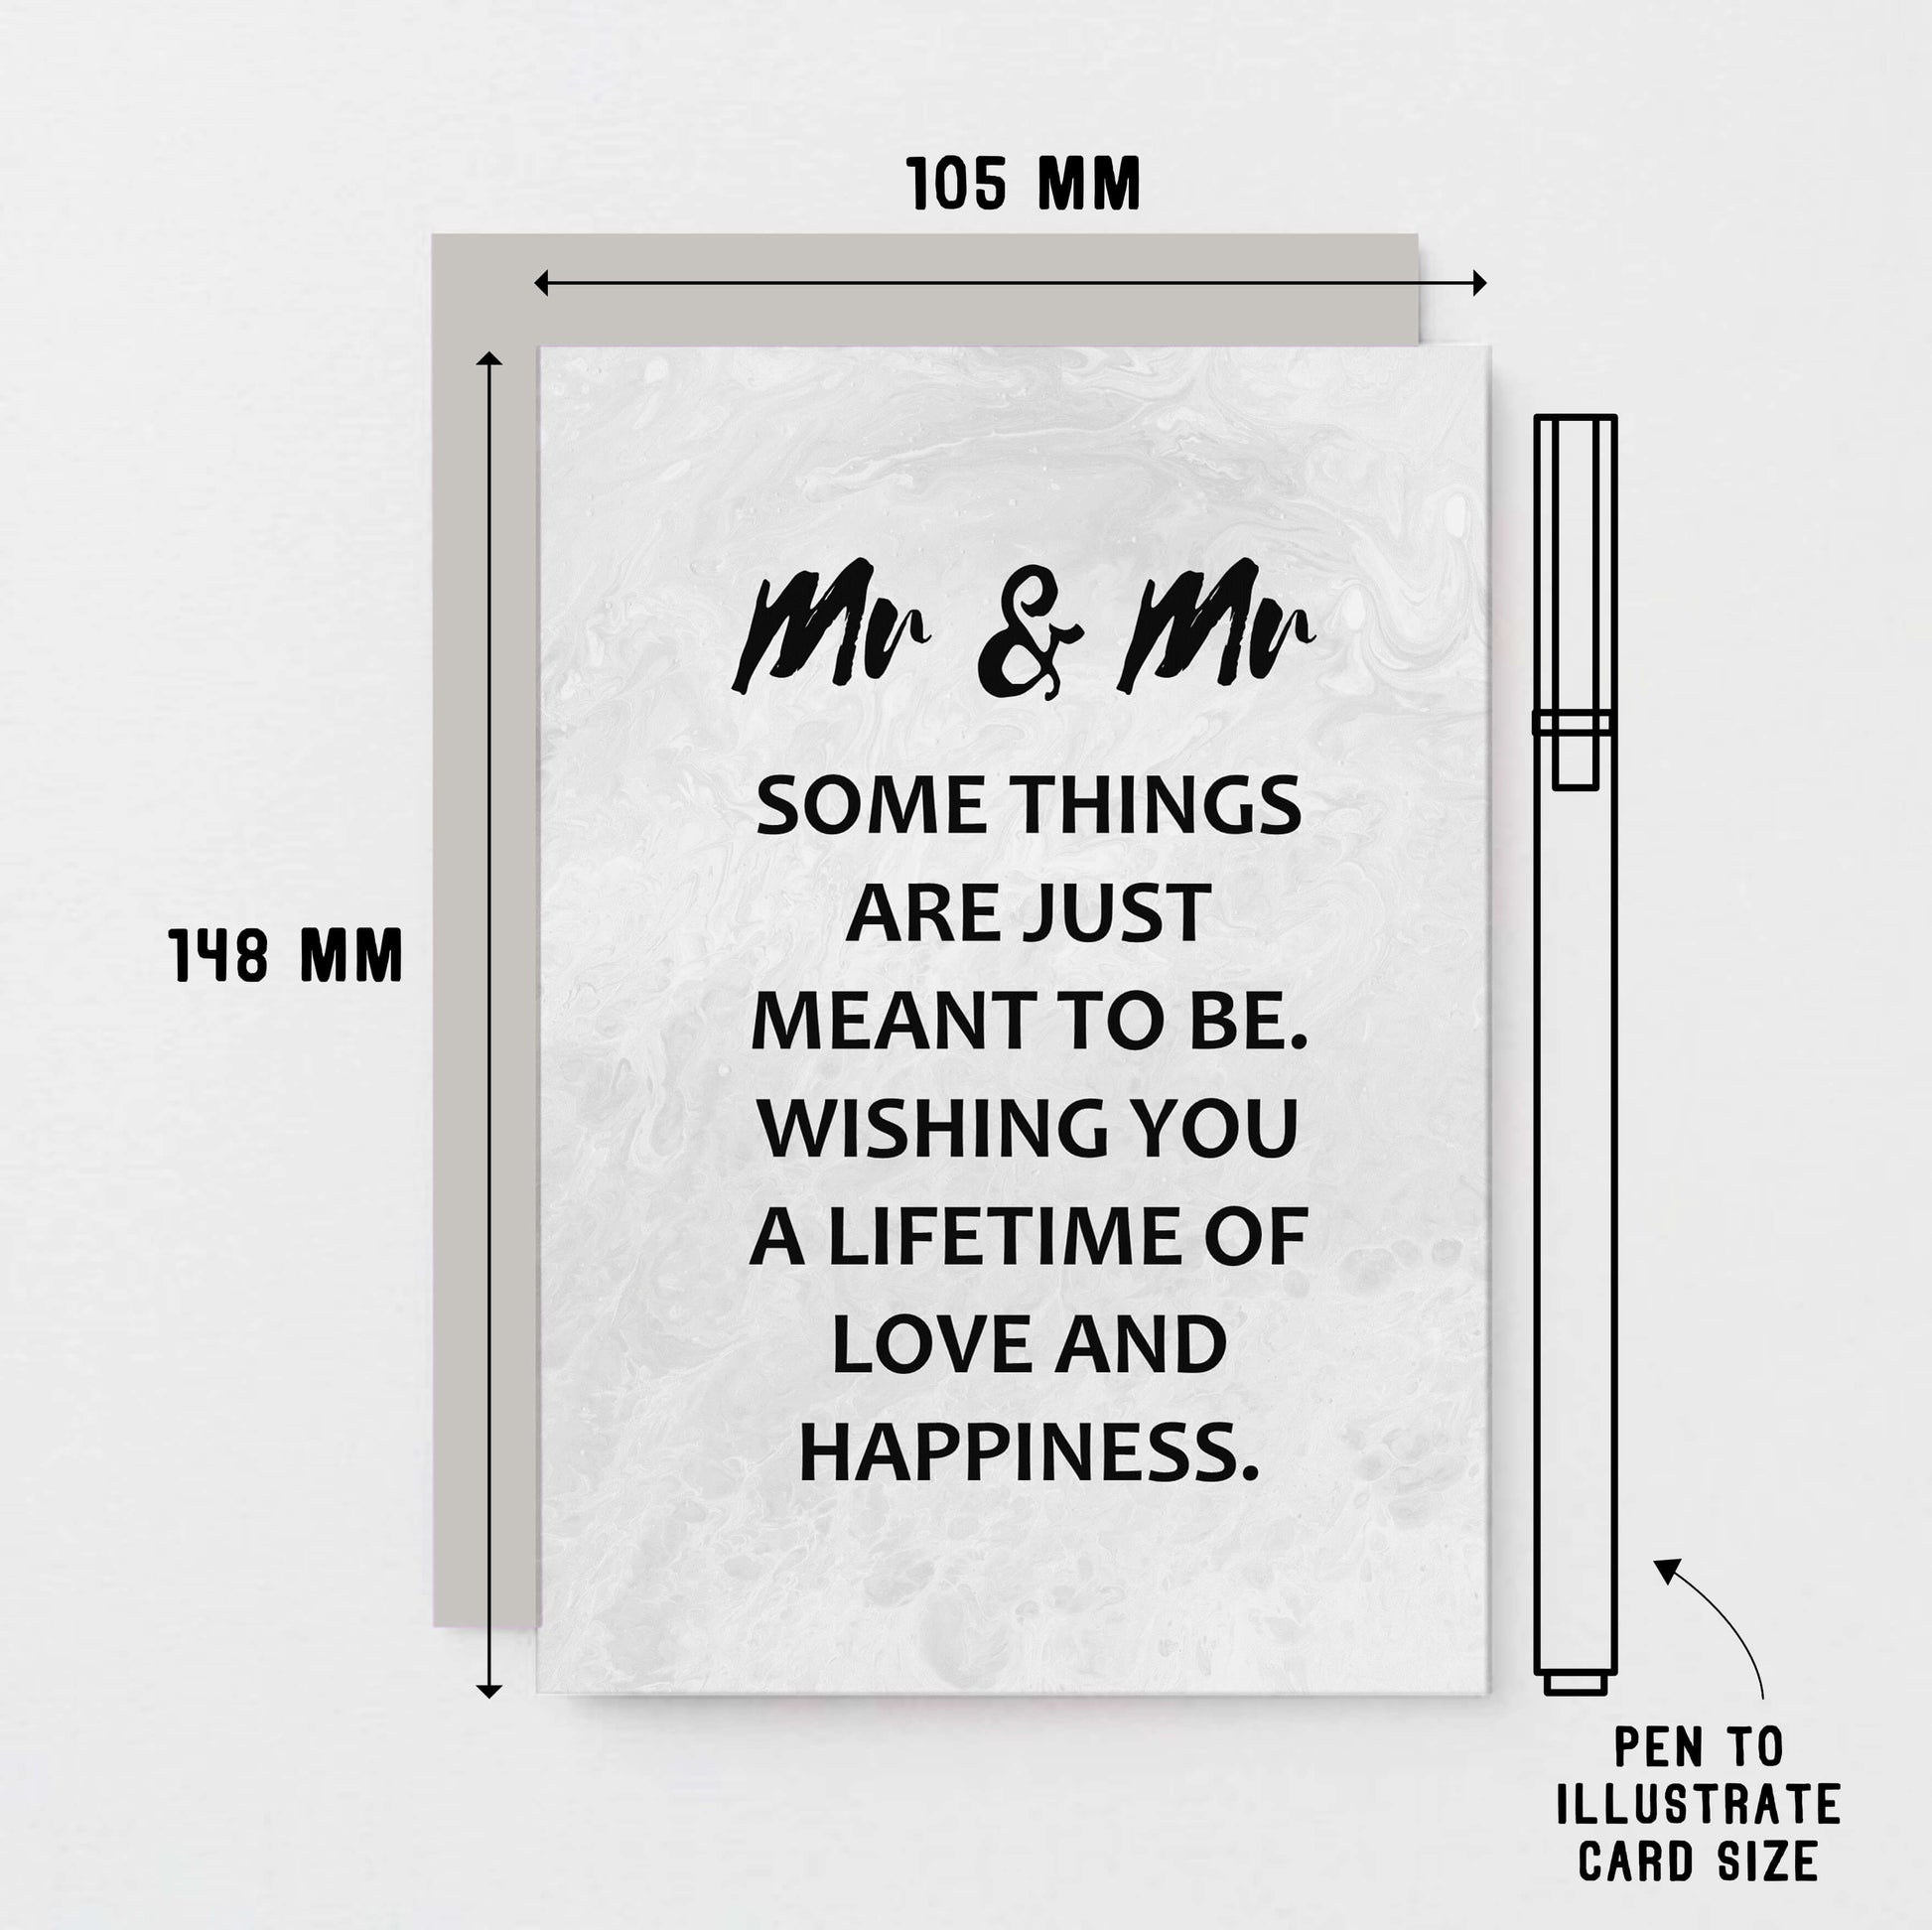 Gay Wedding Congratulations Card by SixElevenCreations. Reads Mr & Mr Some things are just meant to be. Wishing you a lifetime of love and happiness. Product Code SE3017A6